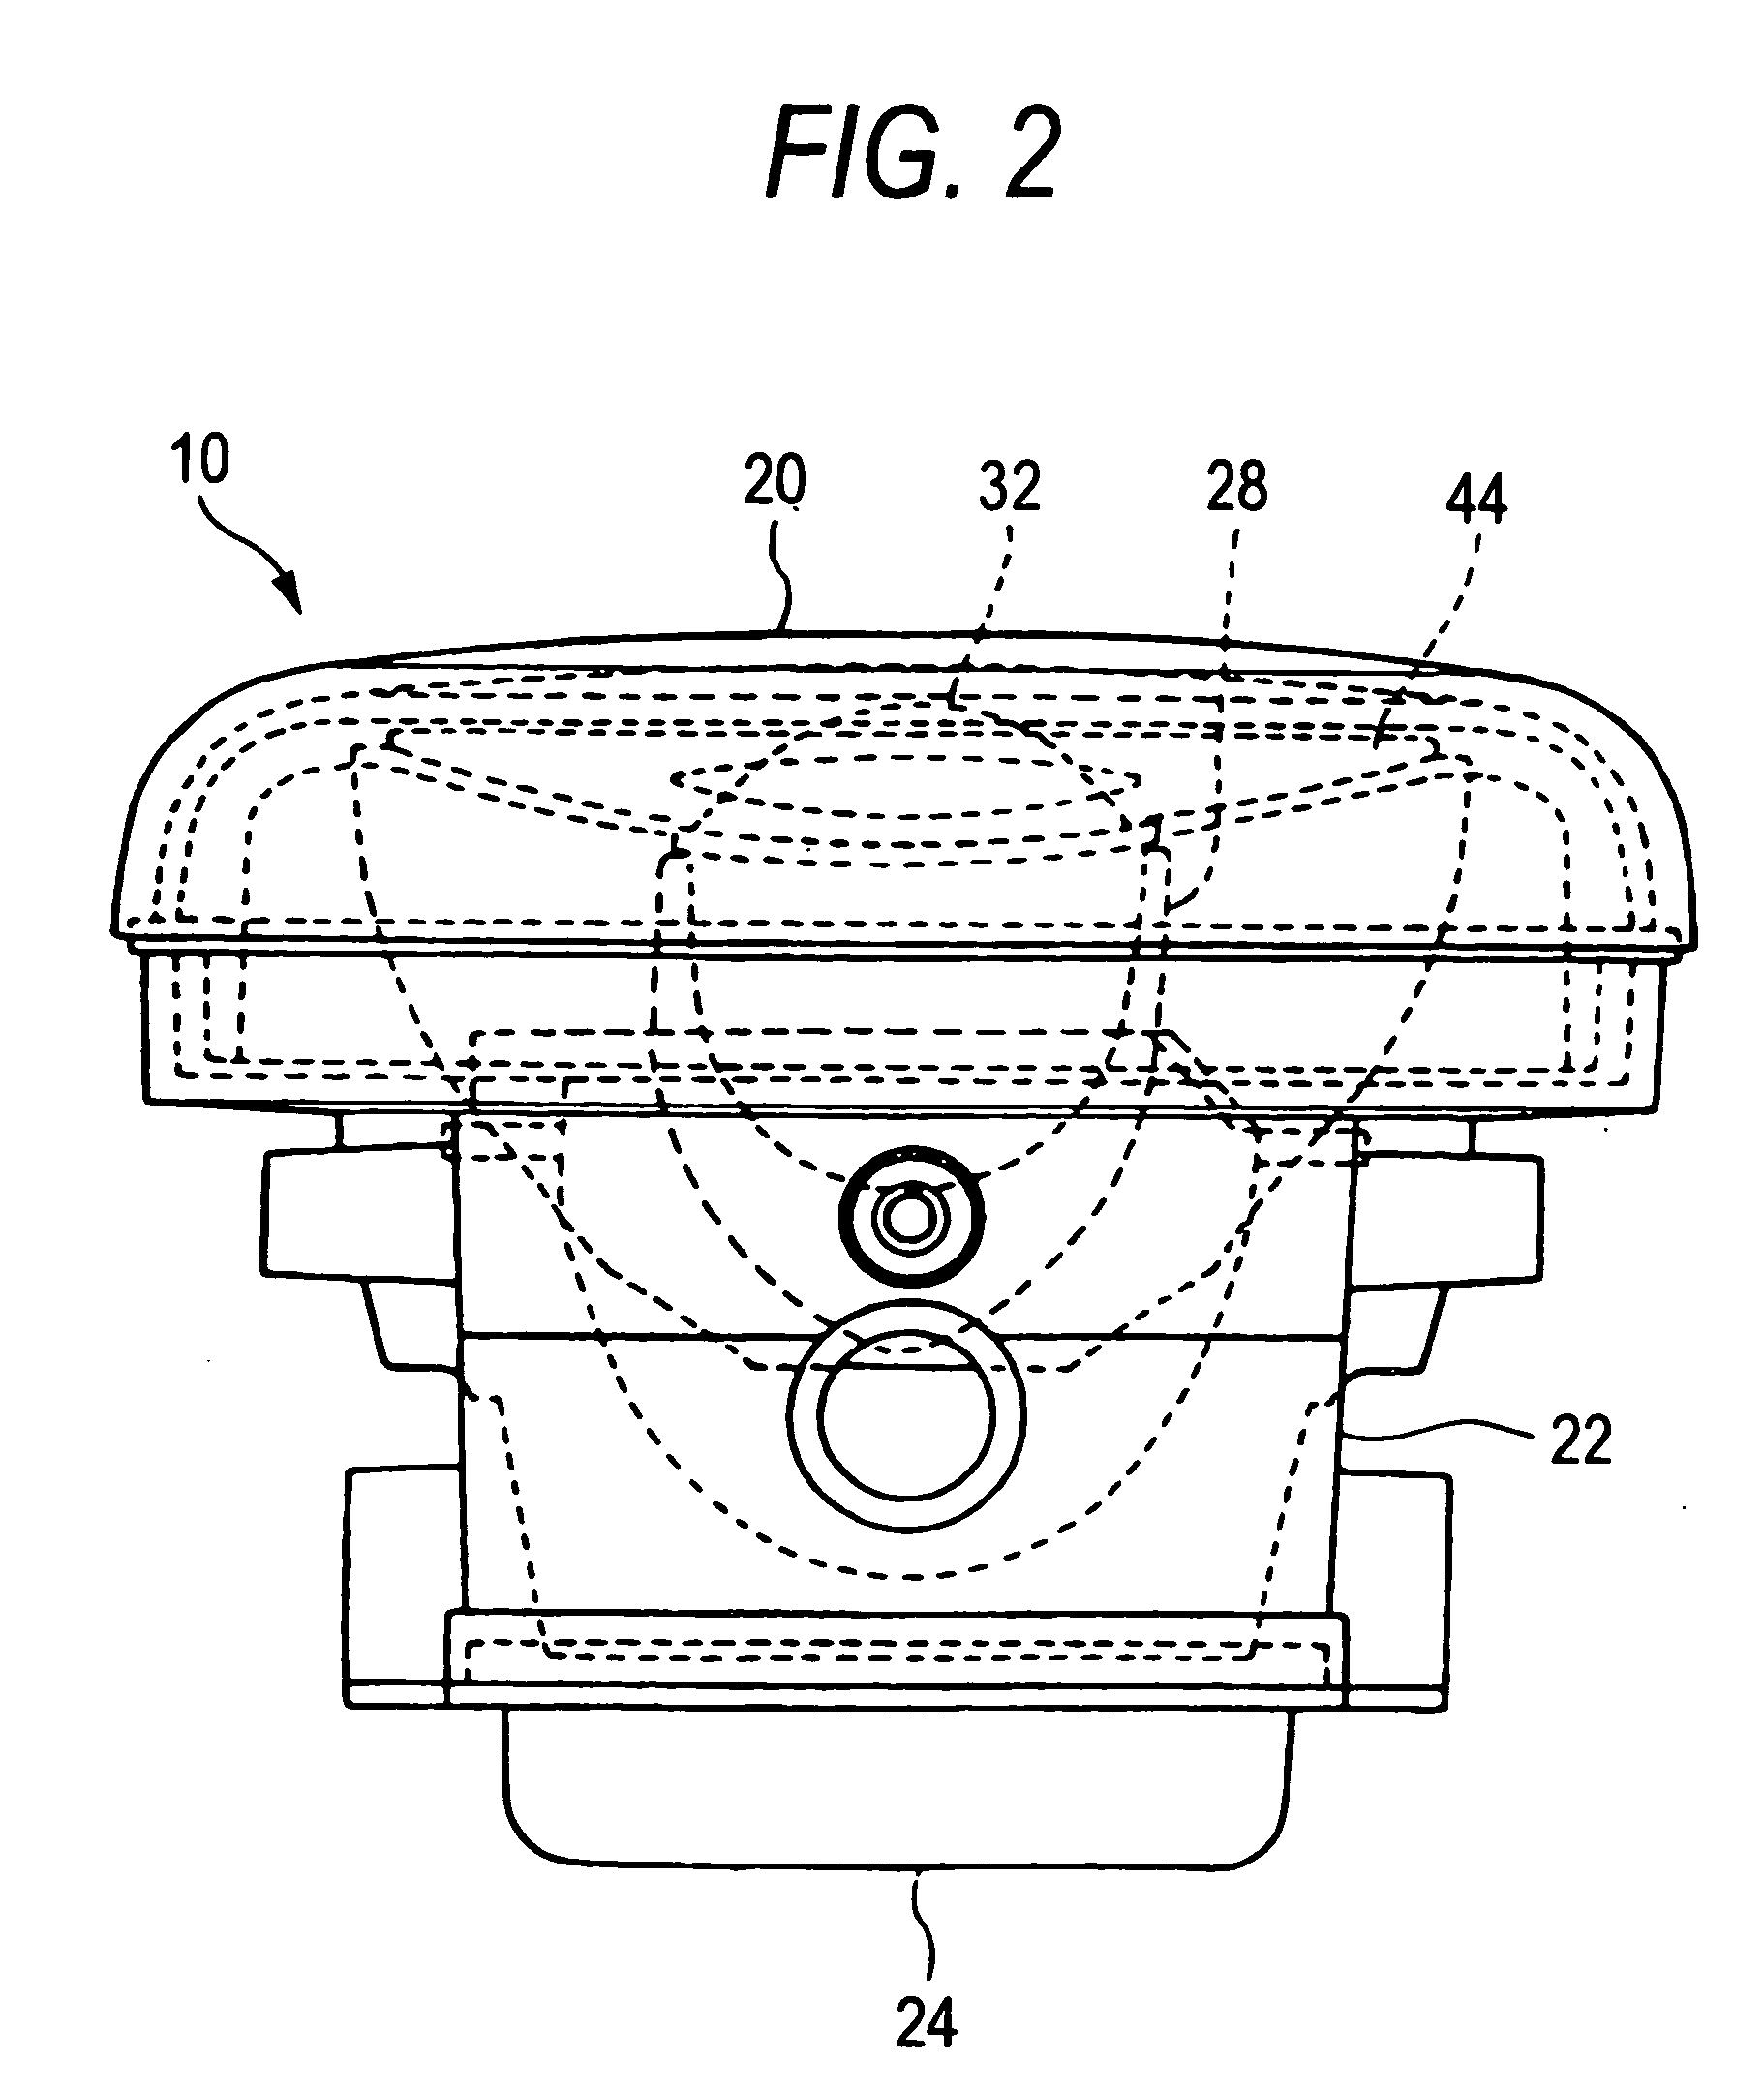 Projector-type lamp unit for vehicle